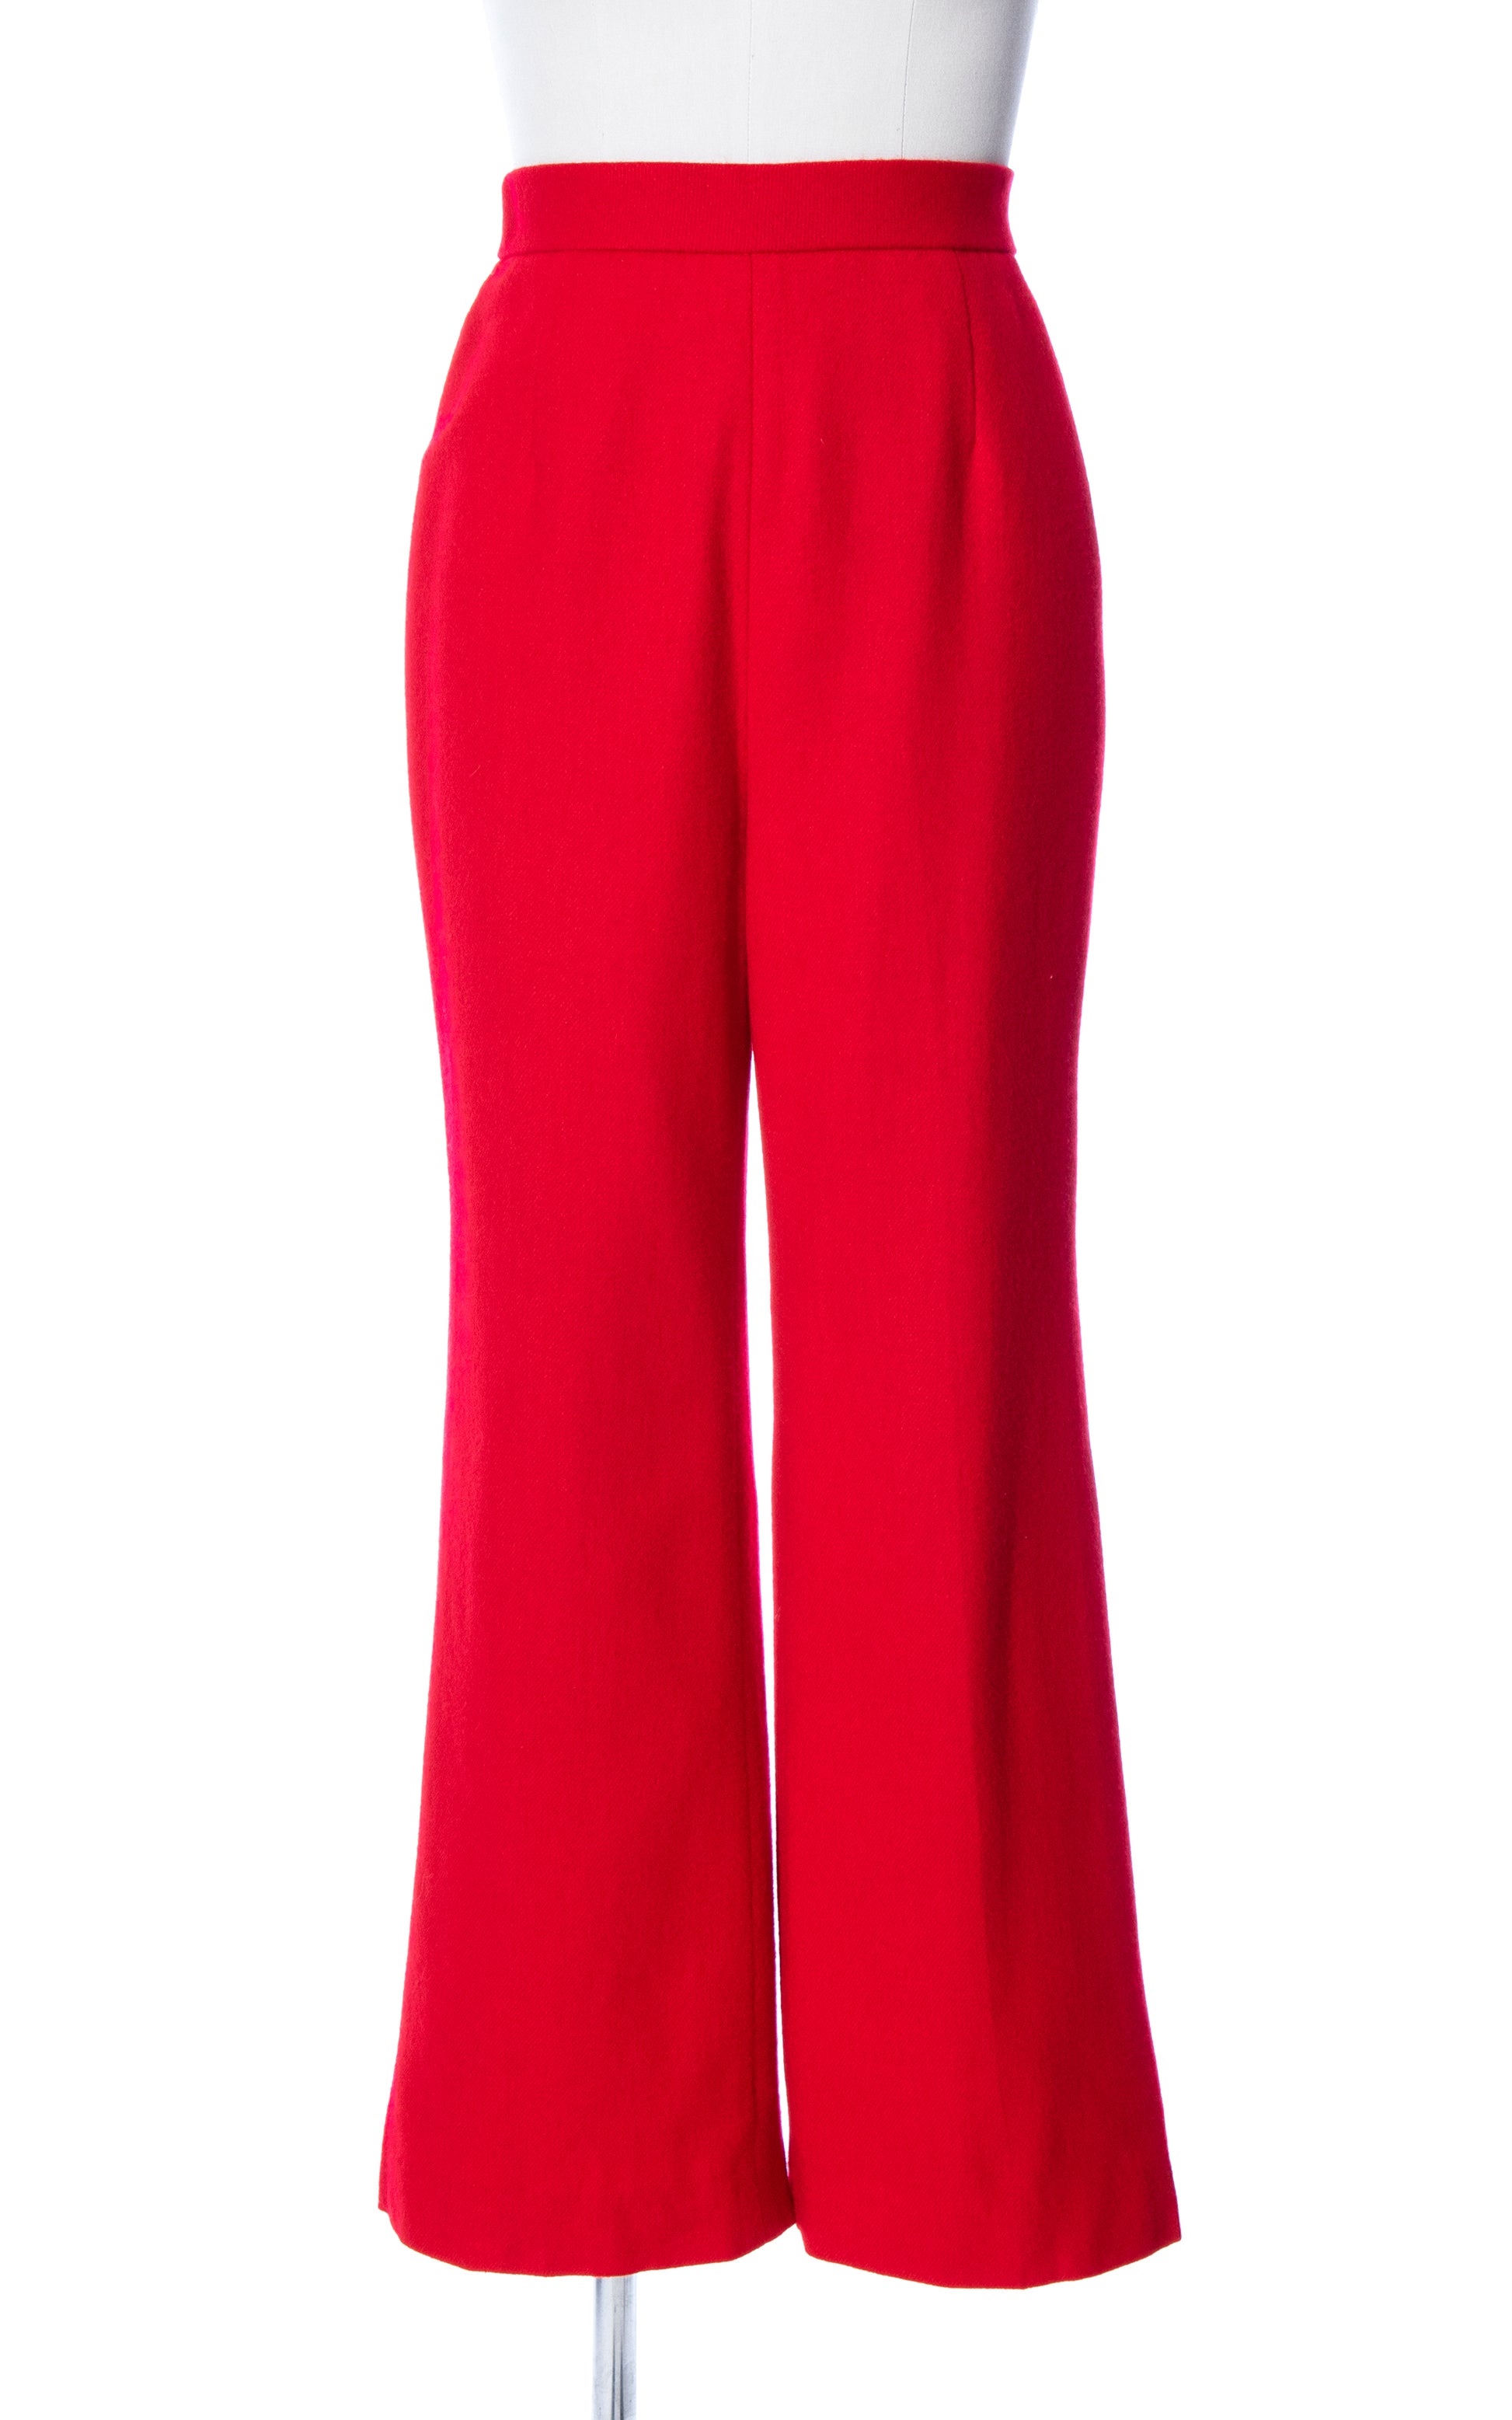 Vintage 70s 1970s Red Wool High Waisted Flared Bell Bottom Pants Birthday Life Vintage